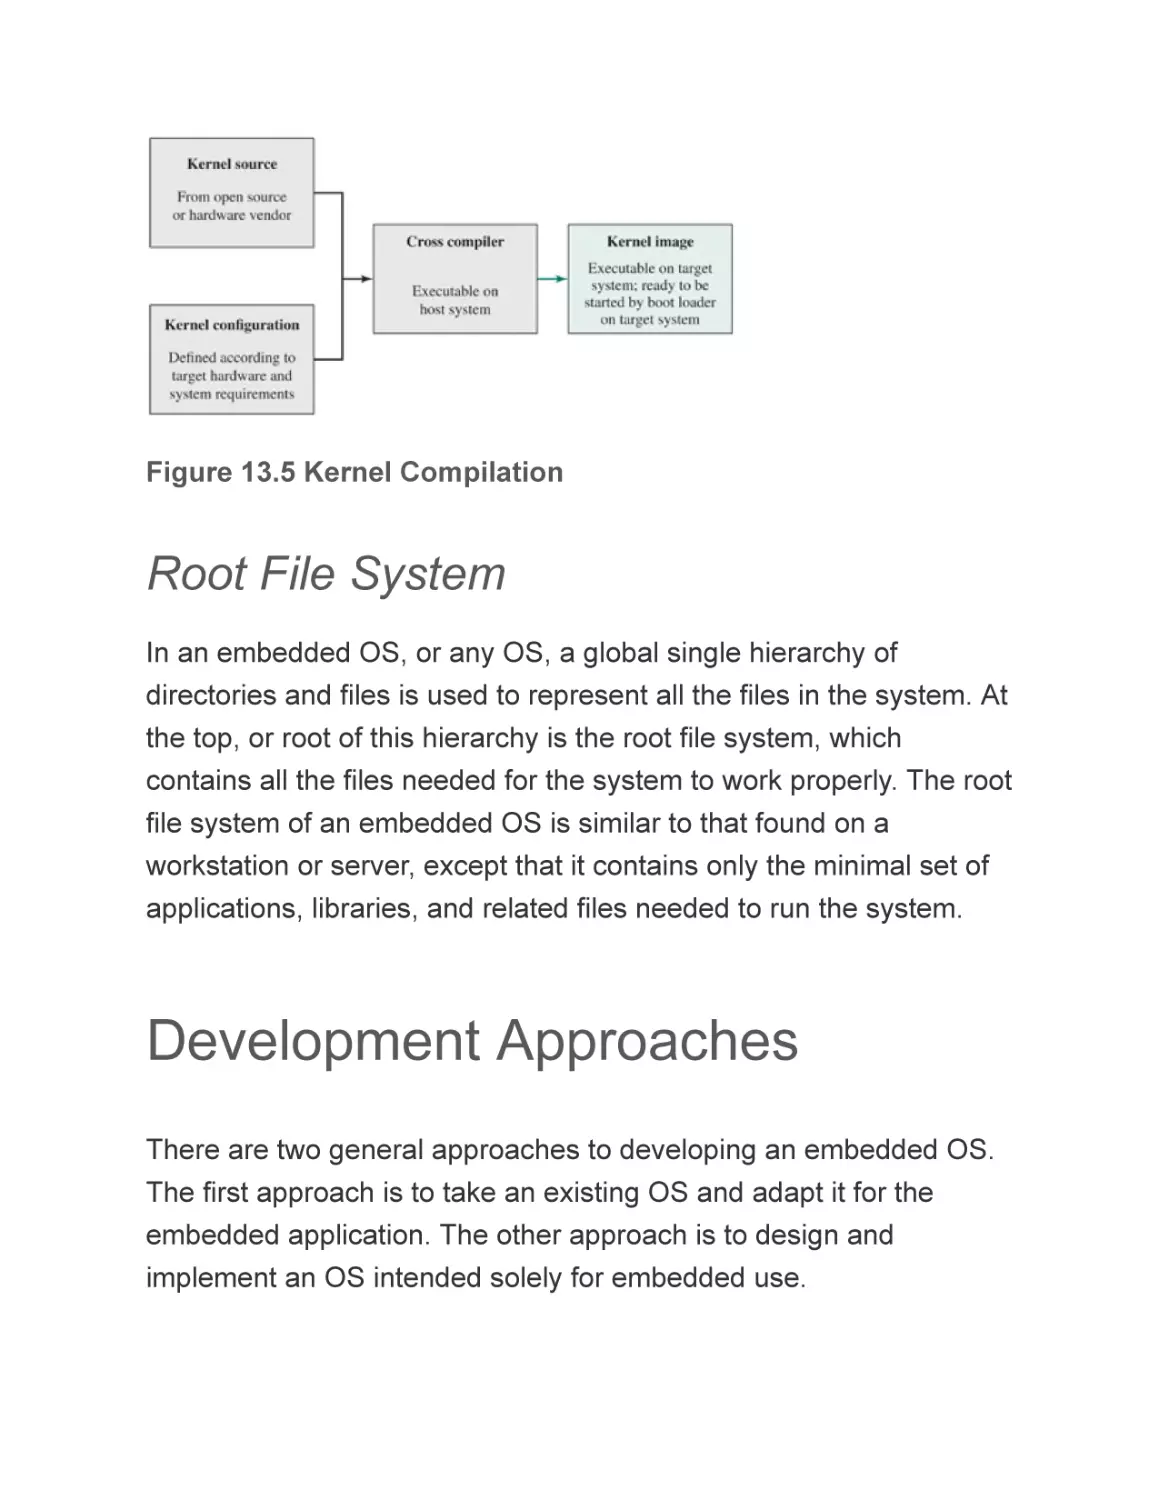 Root File System
Development Approaches